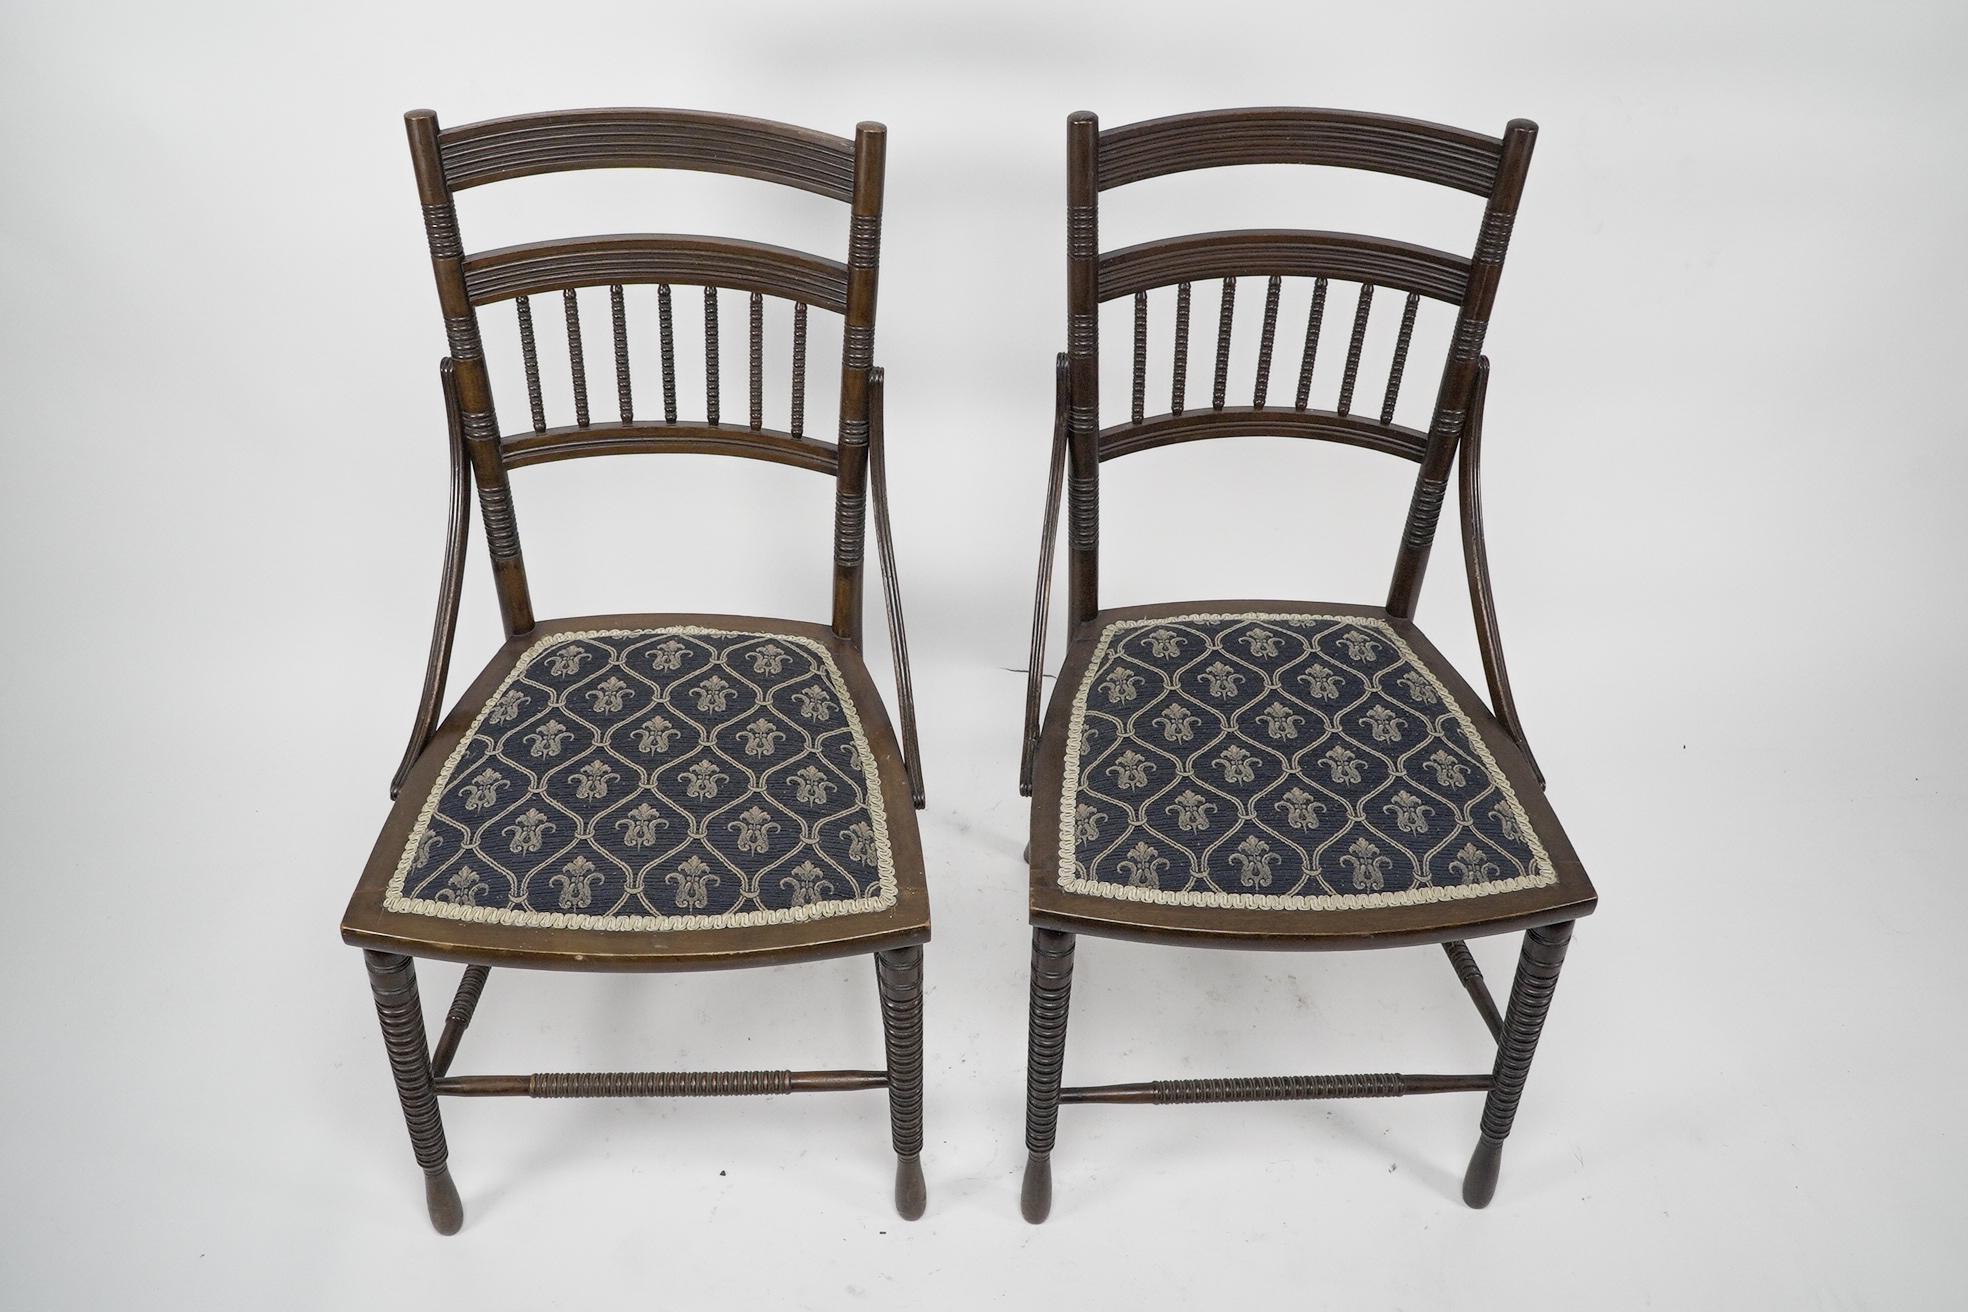 Aesthetic Movement R. W. Edis, probably made by Jackson & Graham A fine pair of Walnut side chairs For Sale